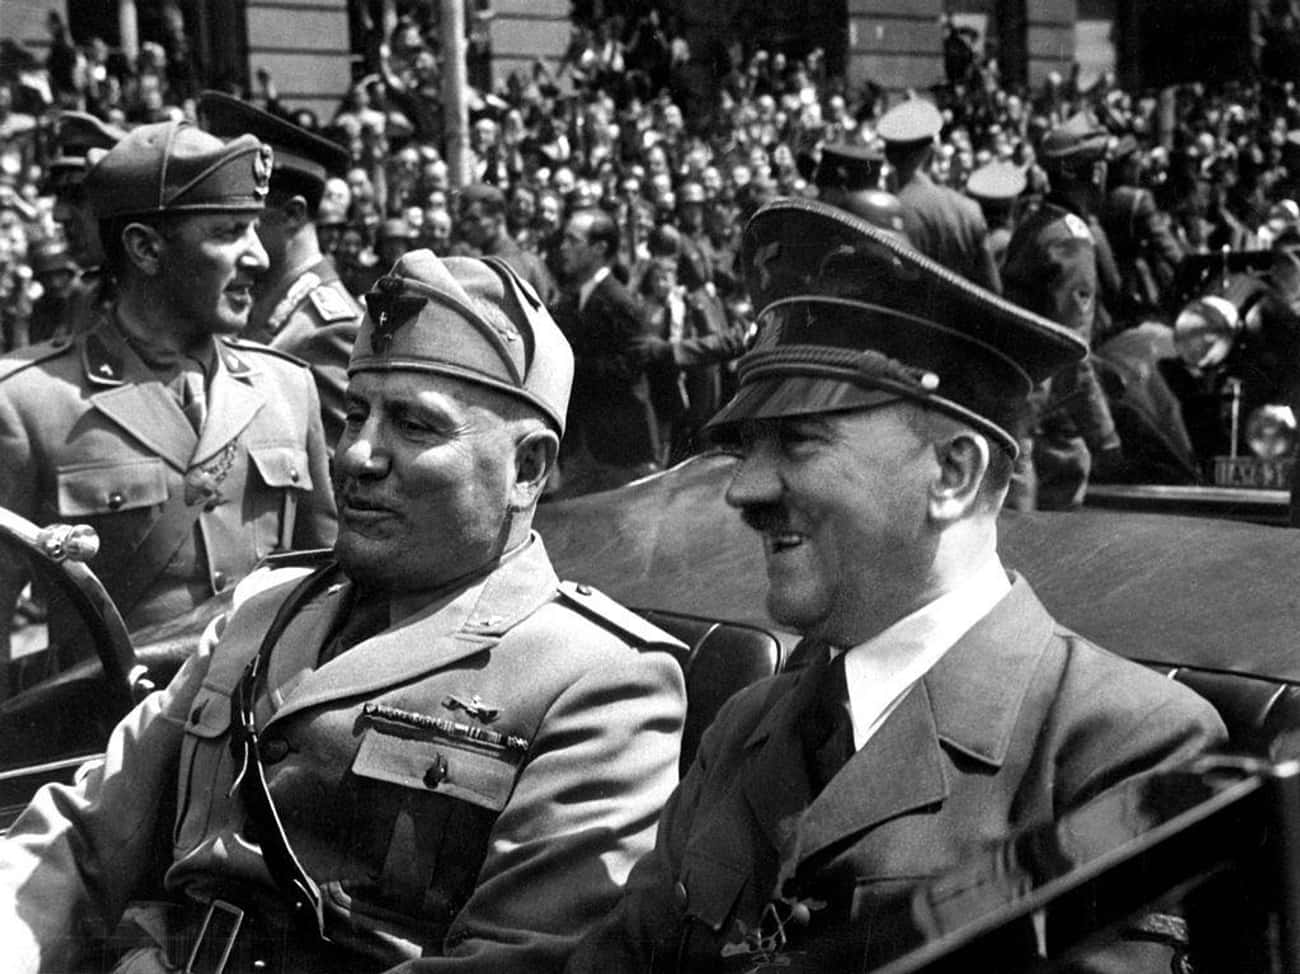 When He Learned About Benito Mussolini's Demise At The Hands Of Italian Partisans, Hitler Began Acting Quickly